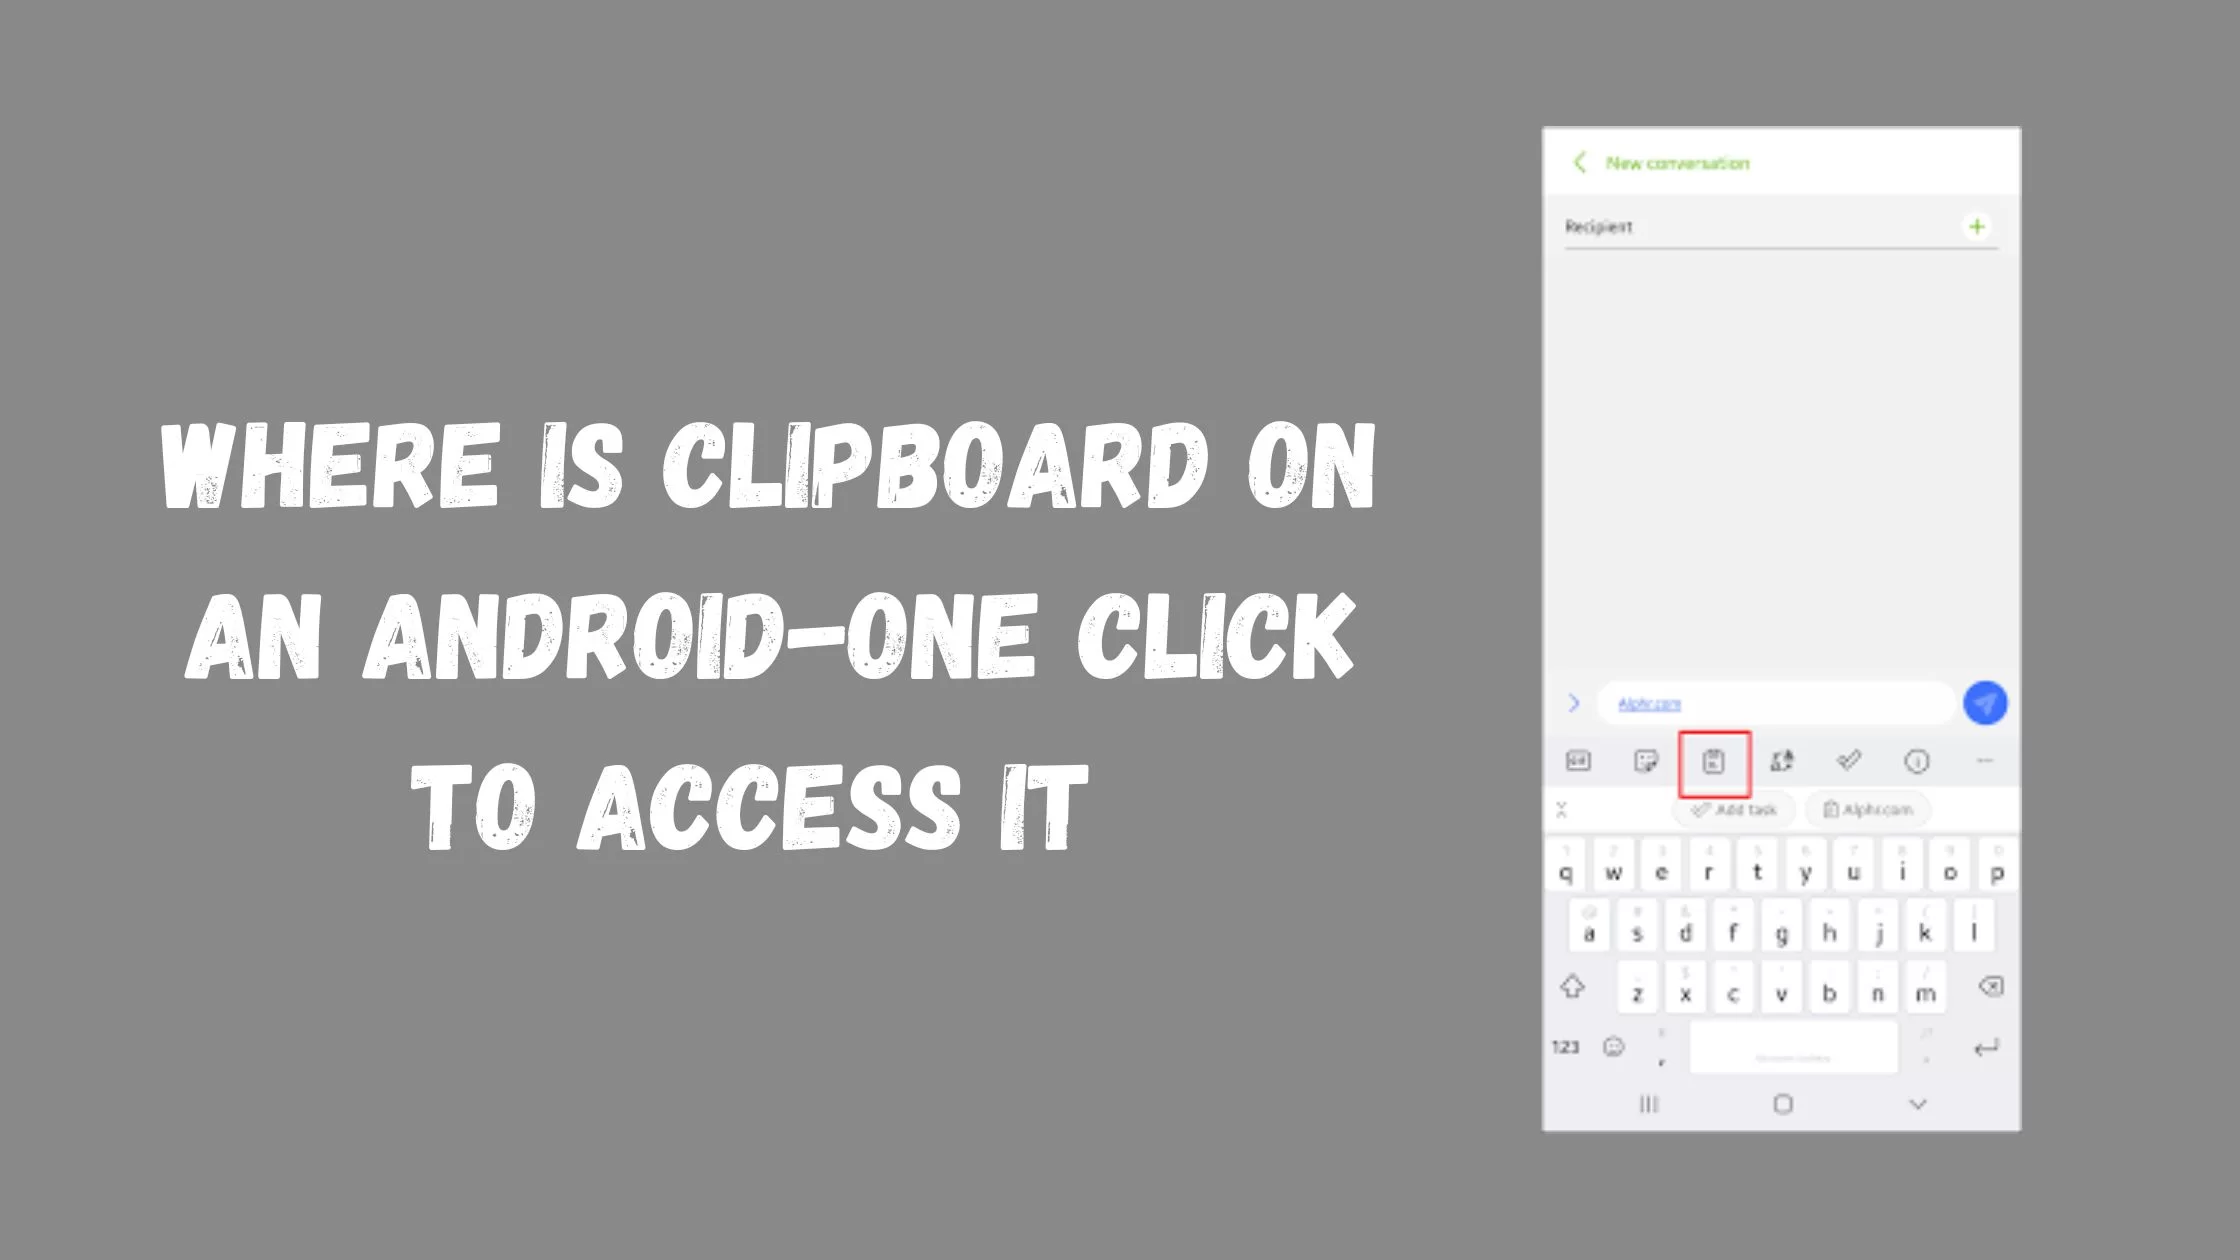 Where is Clipboard On An Android-One Click To Access it